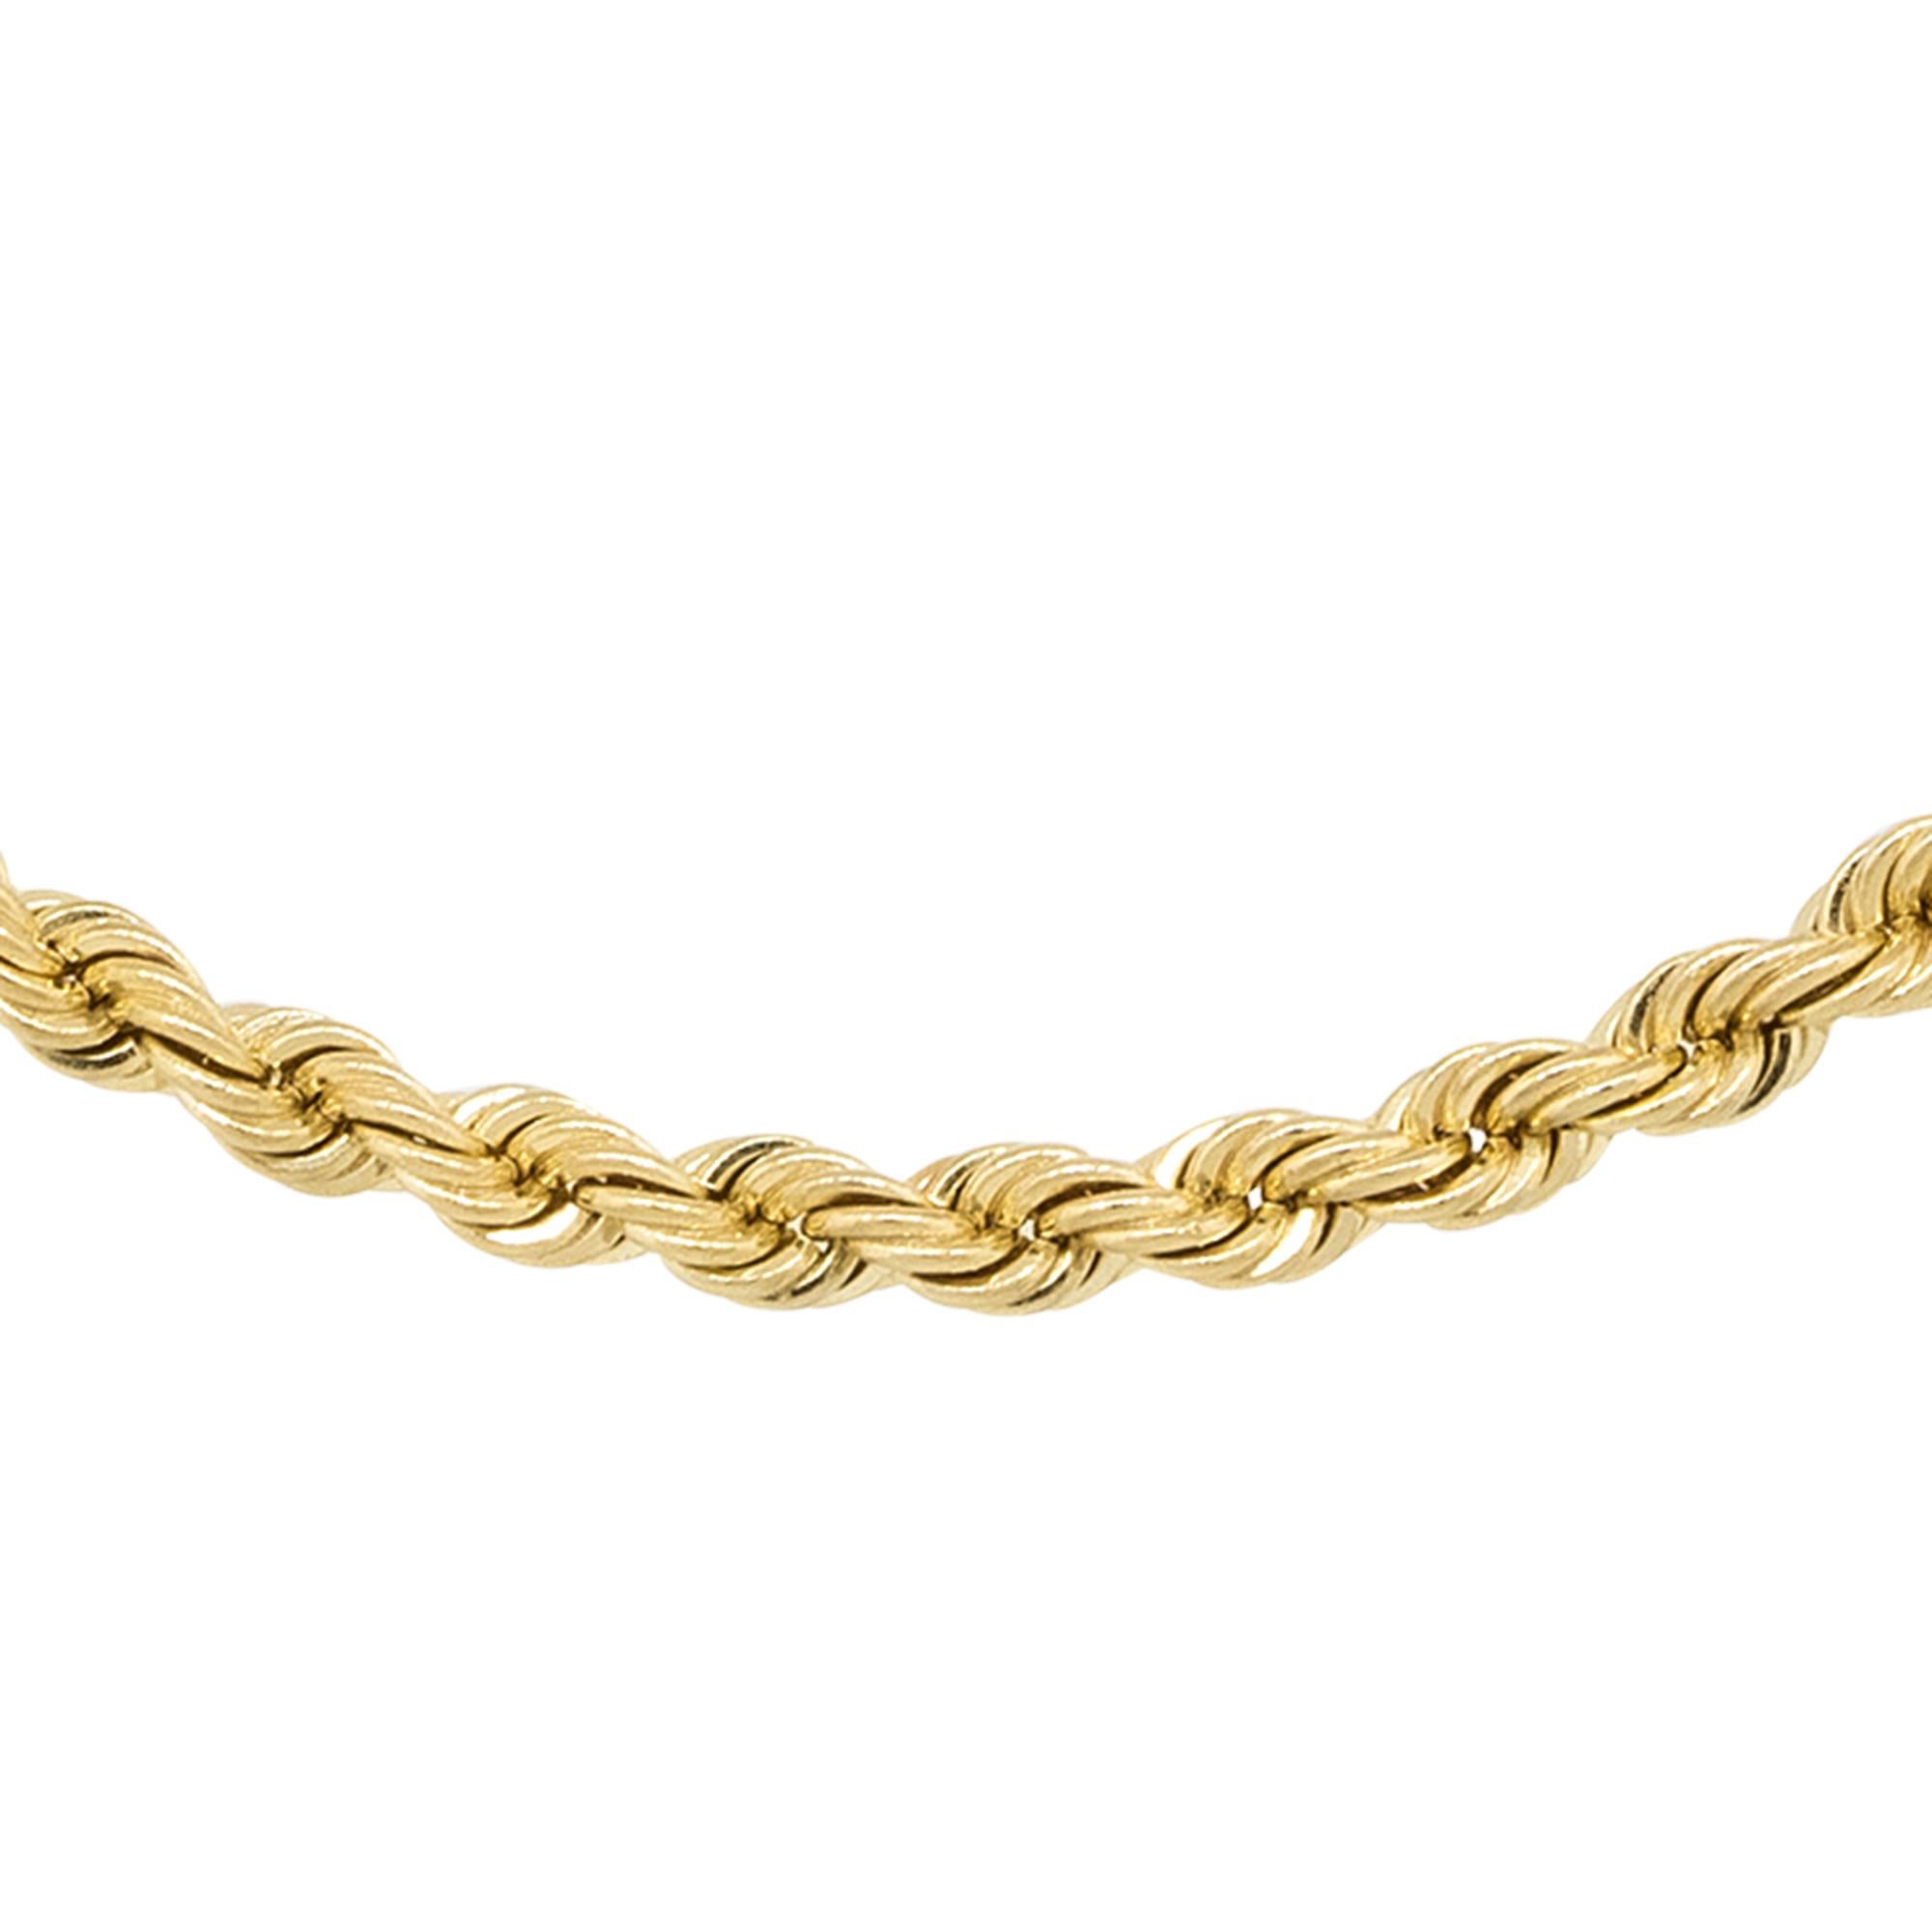 Material: 14k Yellow gold
Measurements: Necklace measures 20